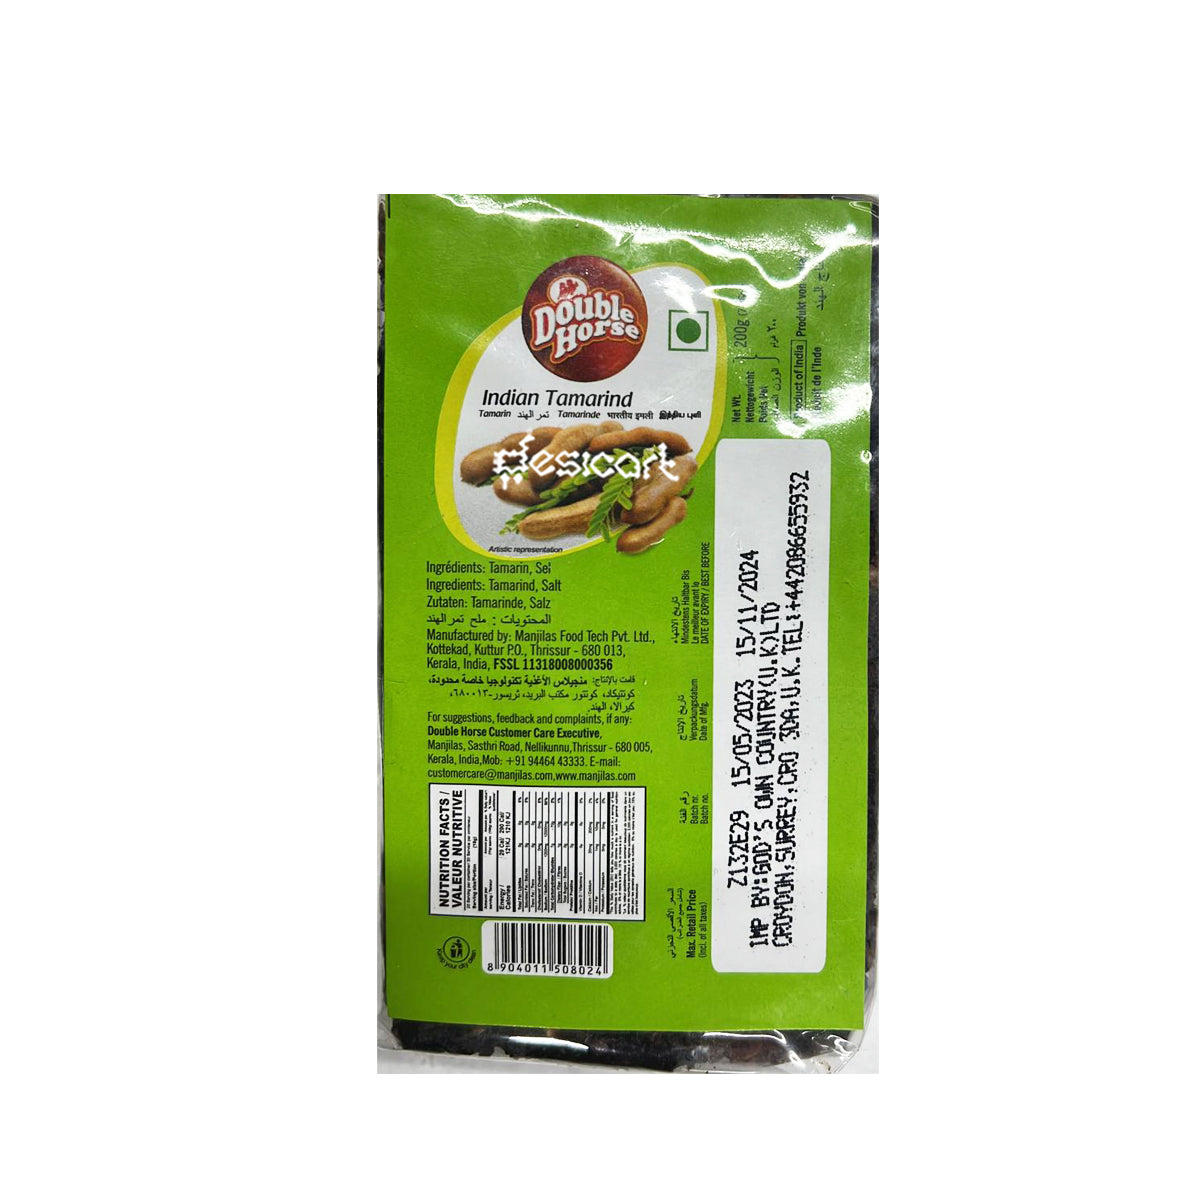 Double Horse Indian Tamarind 200g